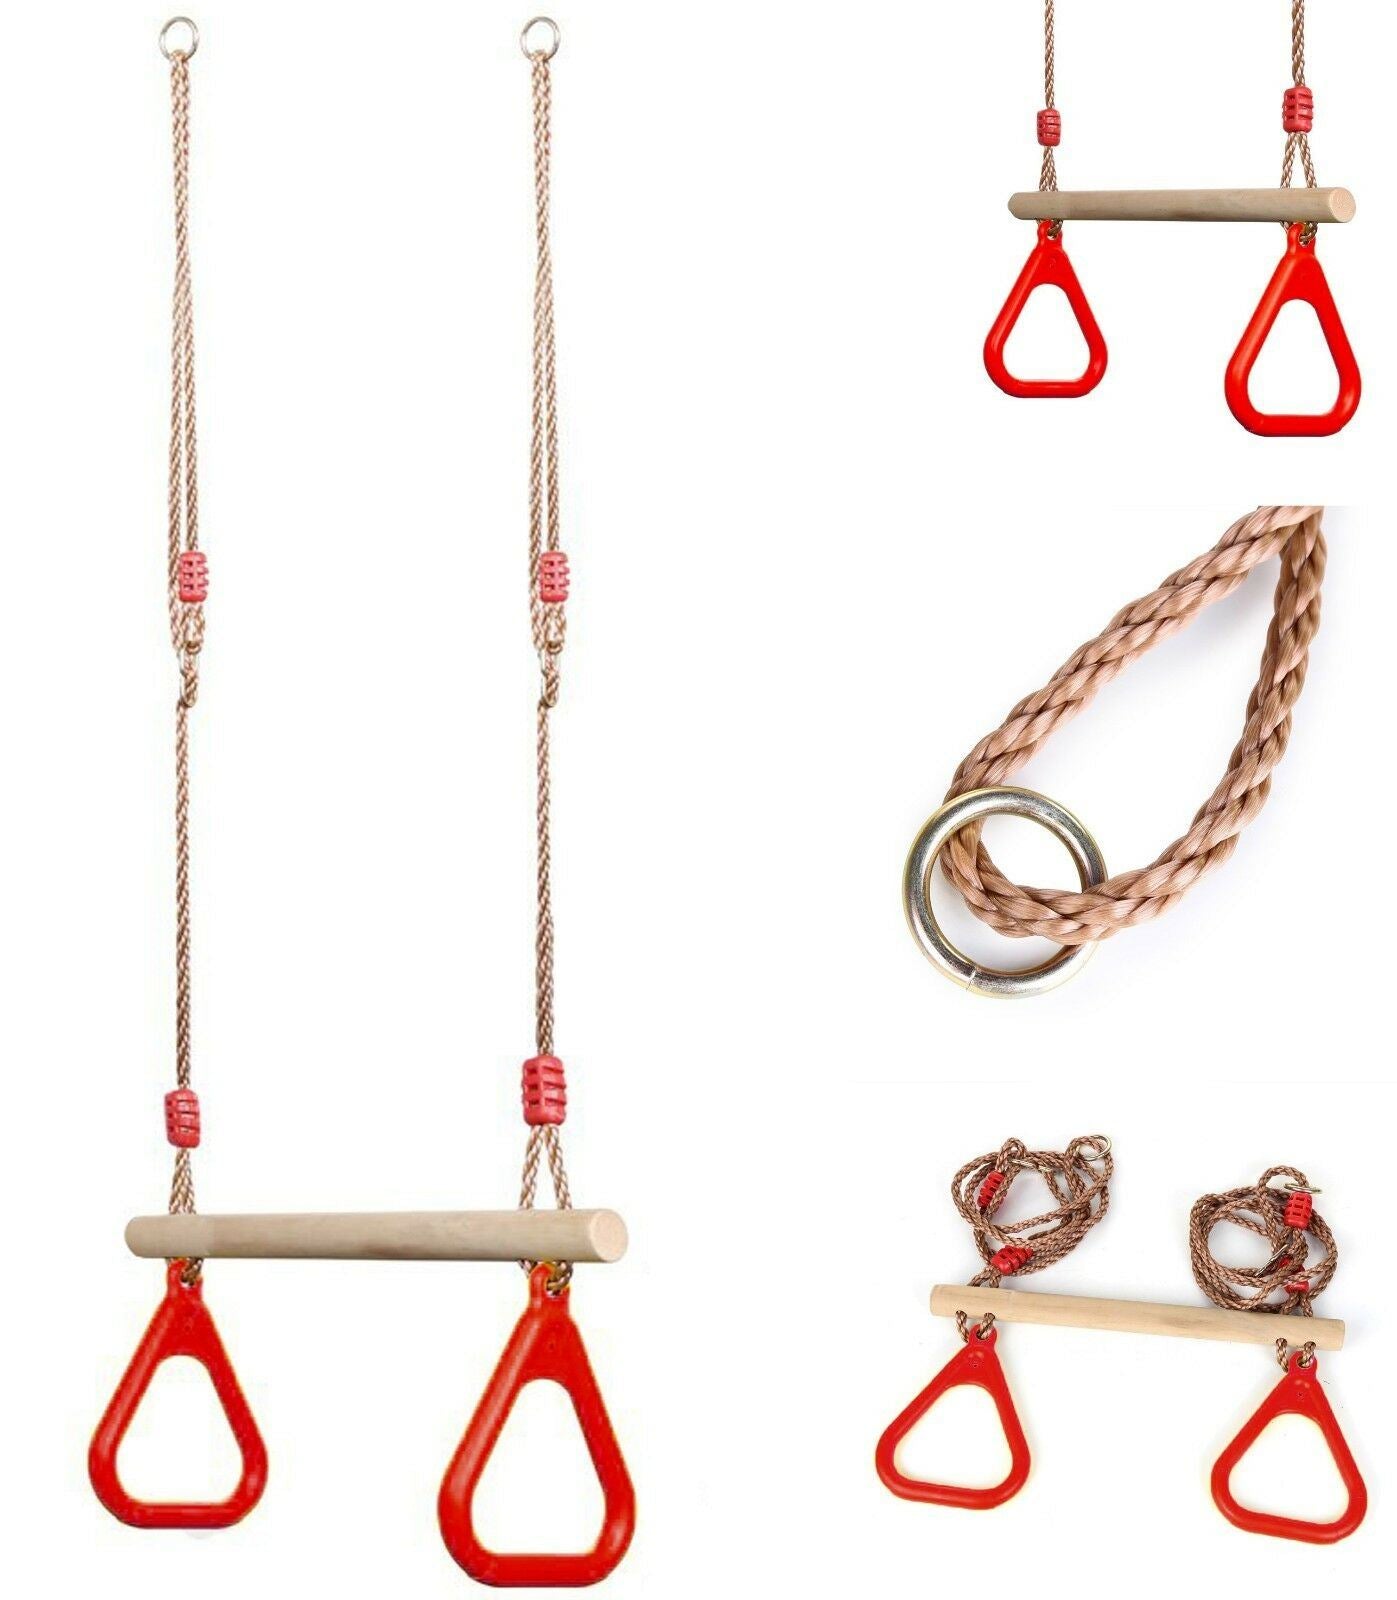 Wooden Trapeze Swing, Rope Ladder & Red Plate Seat by The Magic Toy Shop - UKBuyZone